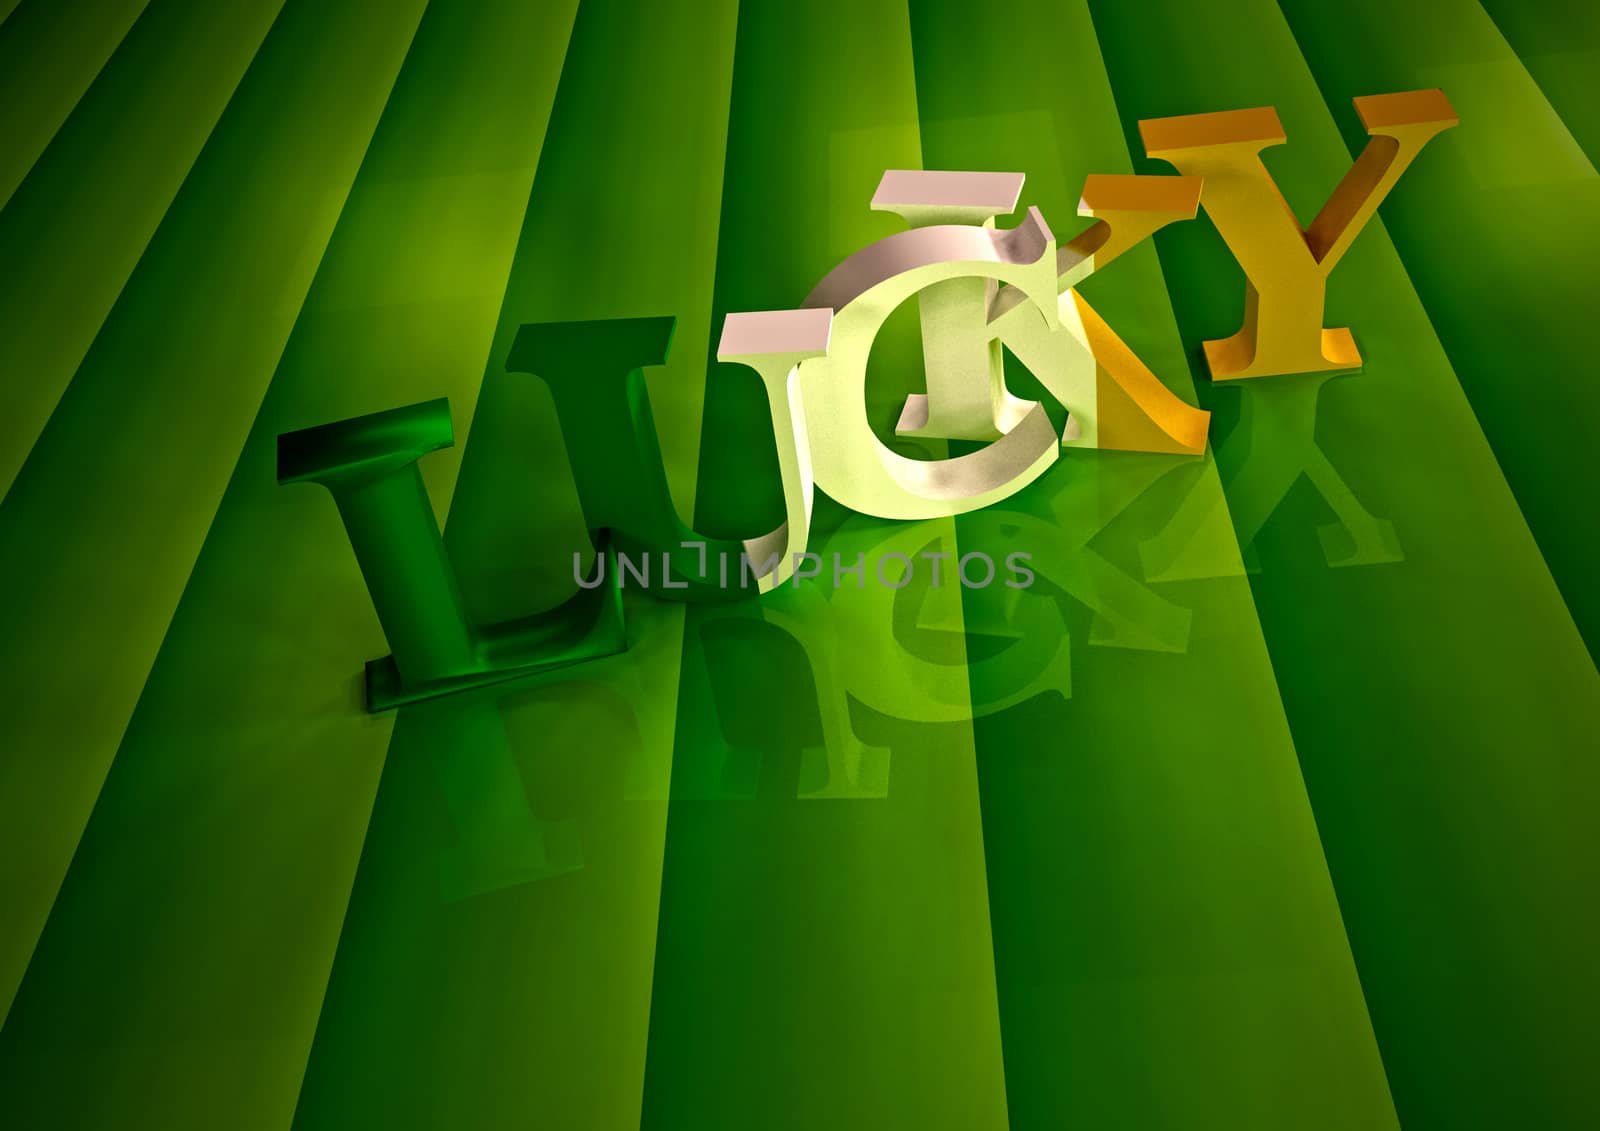 Dimensional inscription of LUCKY on green background.